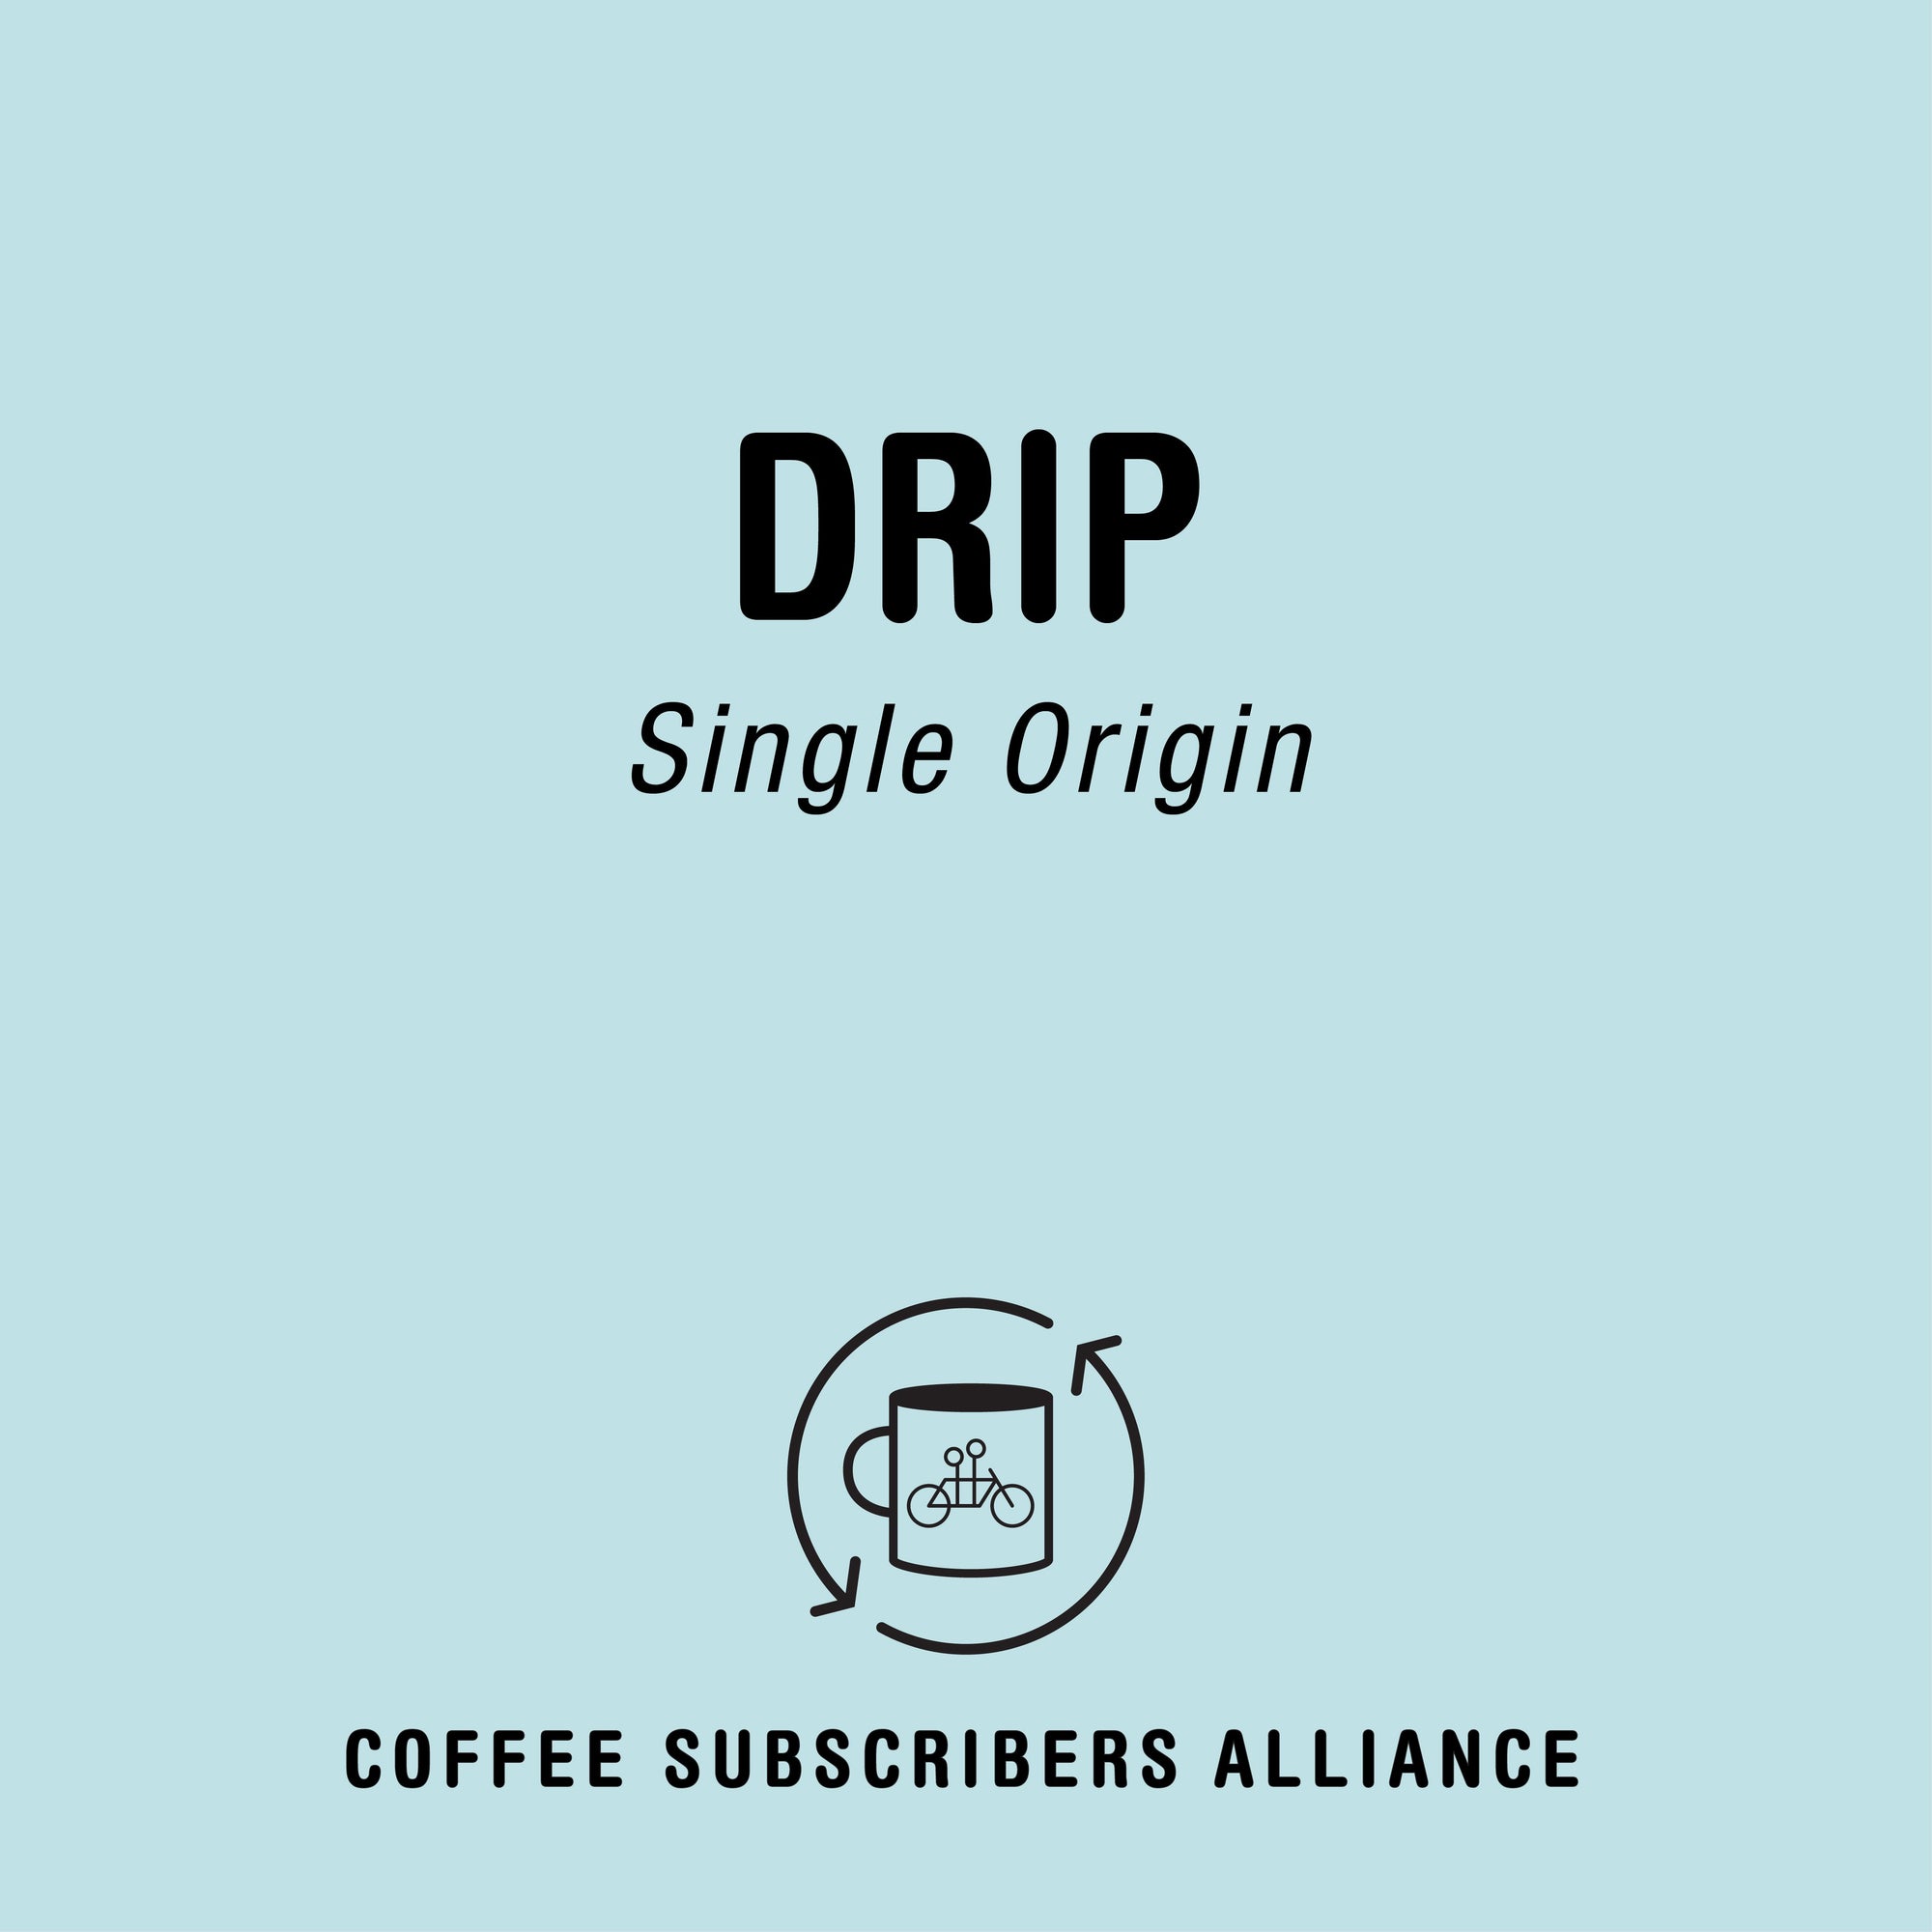 Logo for "Tandem Drip Subscription Gift - 1 Week x 3" featuring the text "single origin" in the center, enclosed within a circle logo with a coffee cup icon. The background is a solid pale blue.